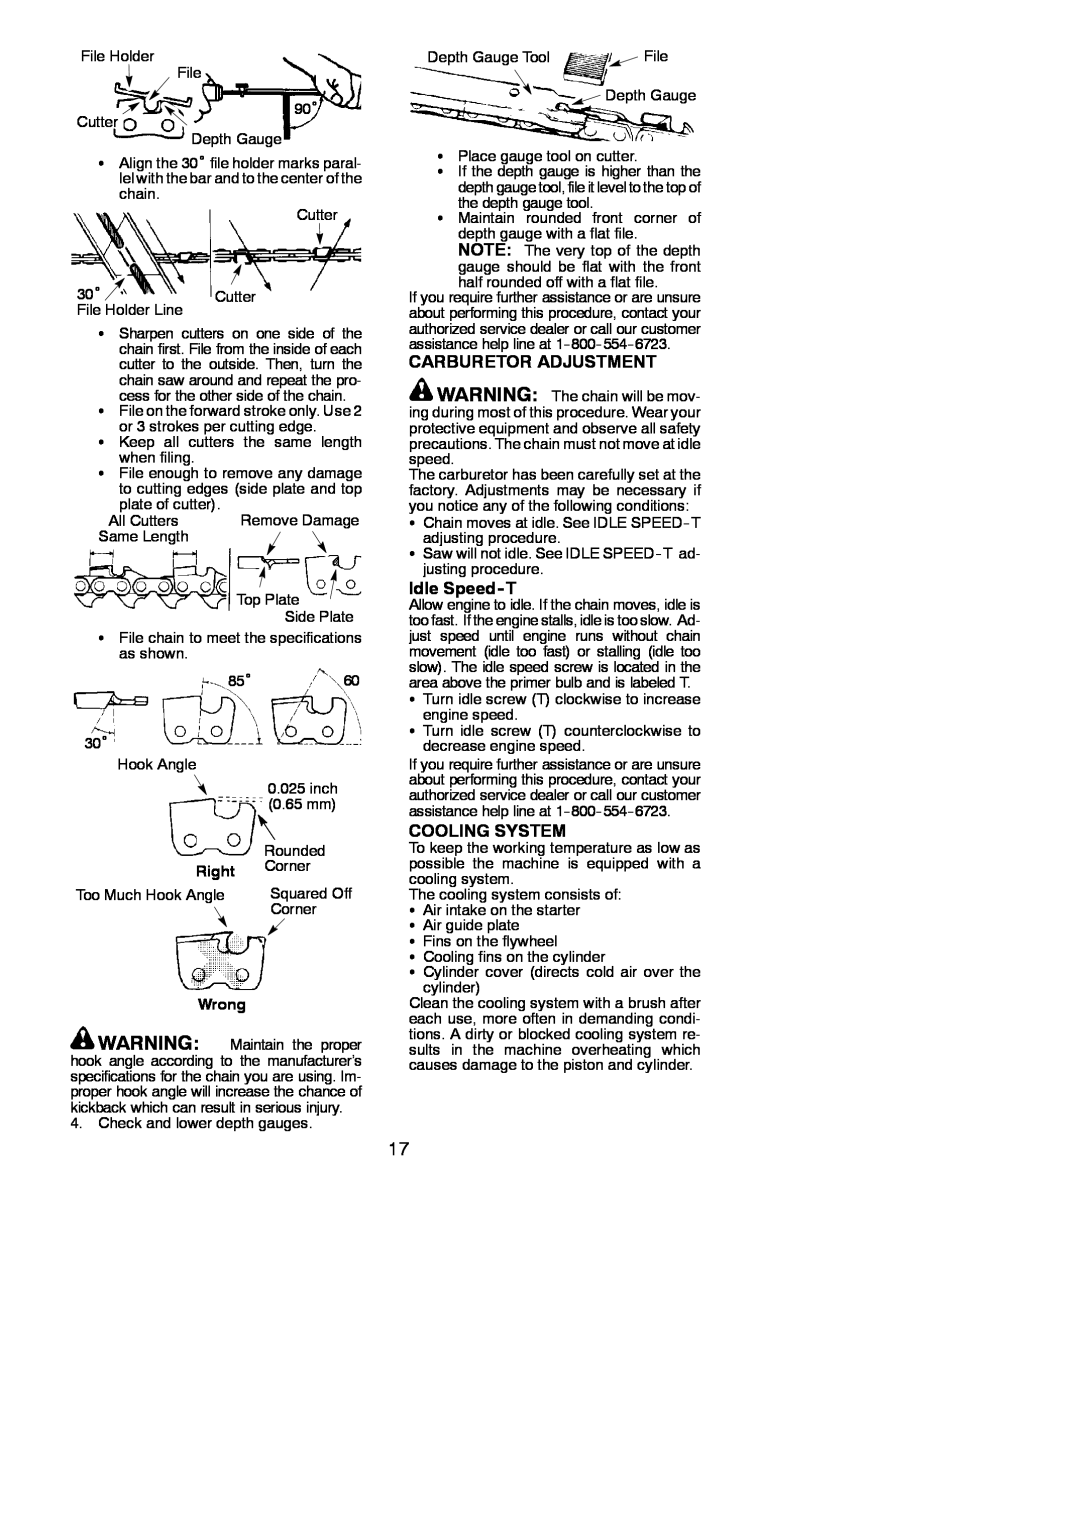 Poulan 545186804 instruction manual Carburetor Adjustment, Idle Speed-T, Cooling System, Right, Wrong 